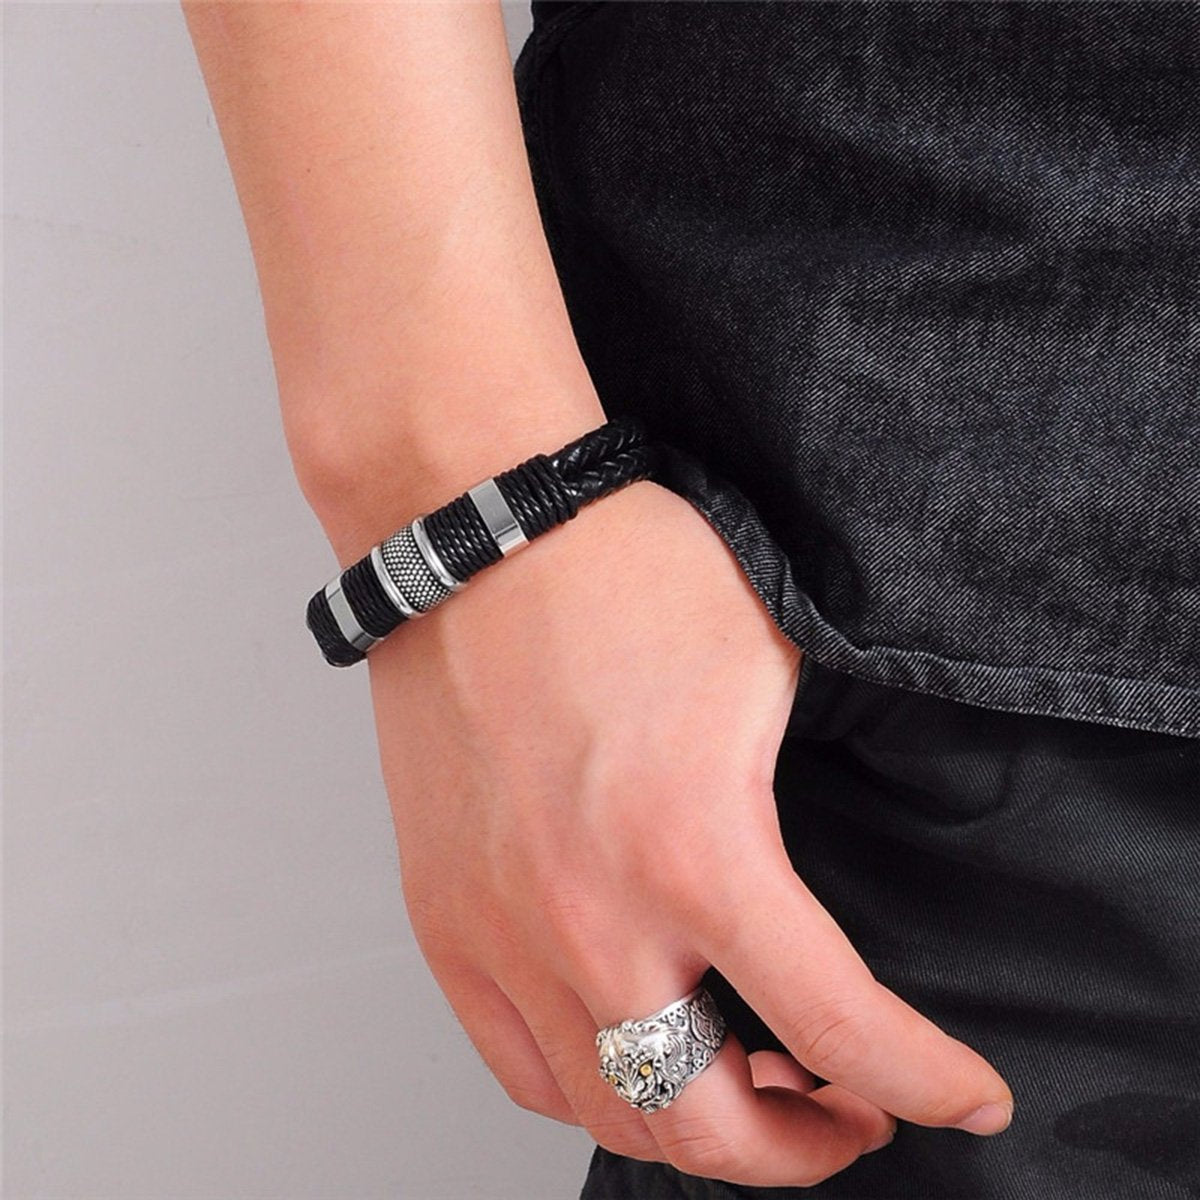 1 Pcs Punk Faux Leather Bracelet For Men Women Hand Harness Belt Cuff  Vintage Rock Jewelry Gothic Bangles Lover Wristband Gifts  Bangles   AliExpress